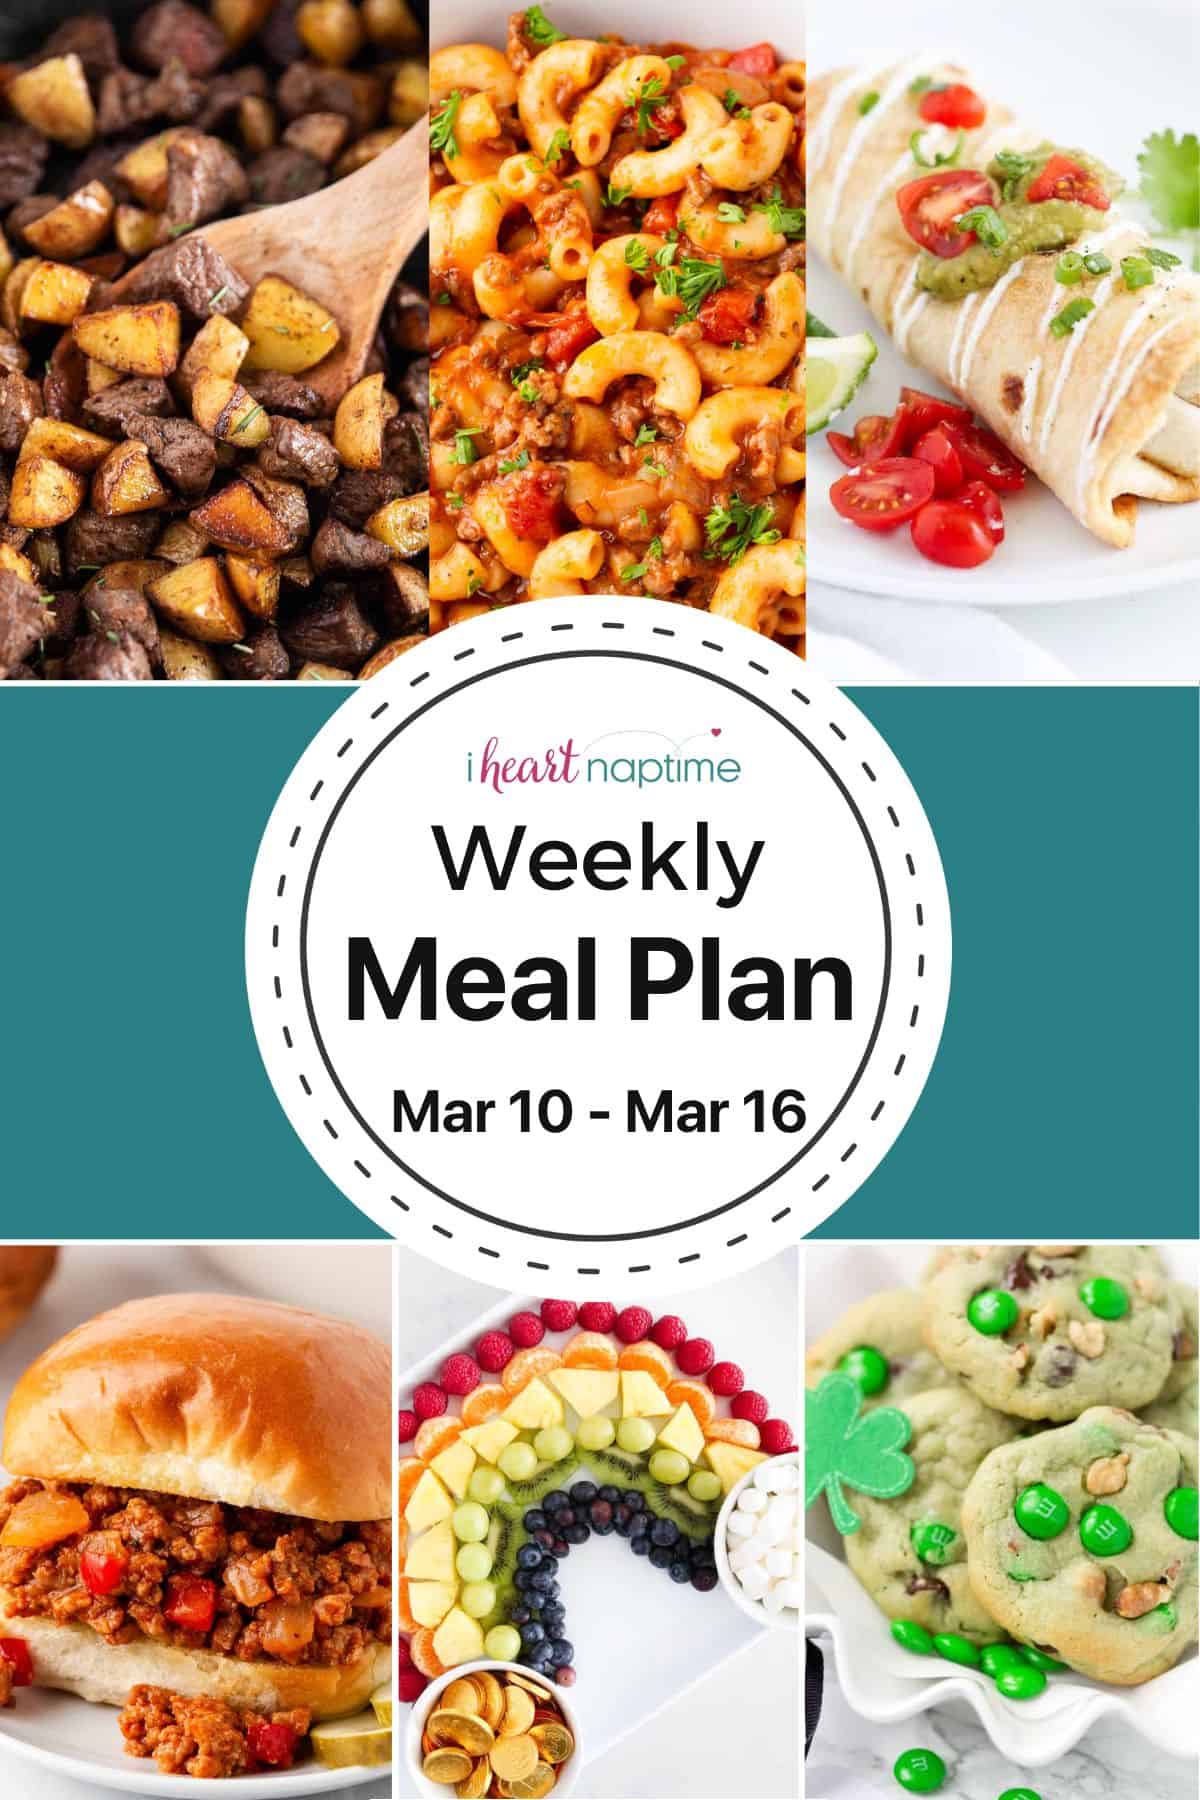 Photo recipes for a weekly meal plan for I Heart Naptime.